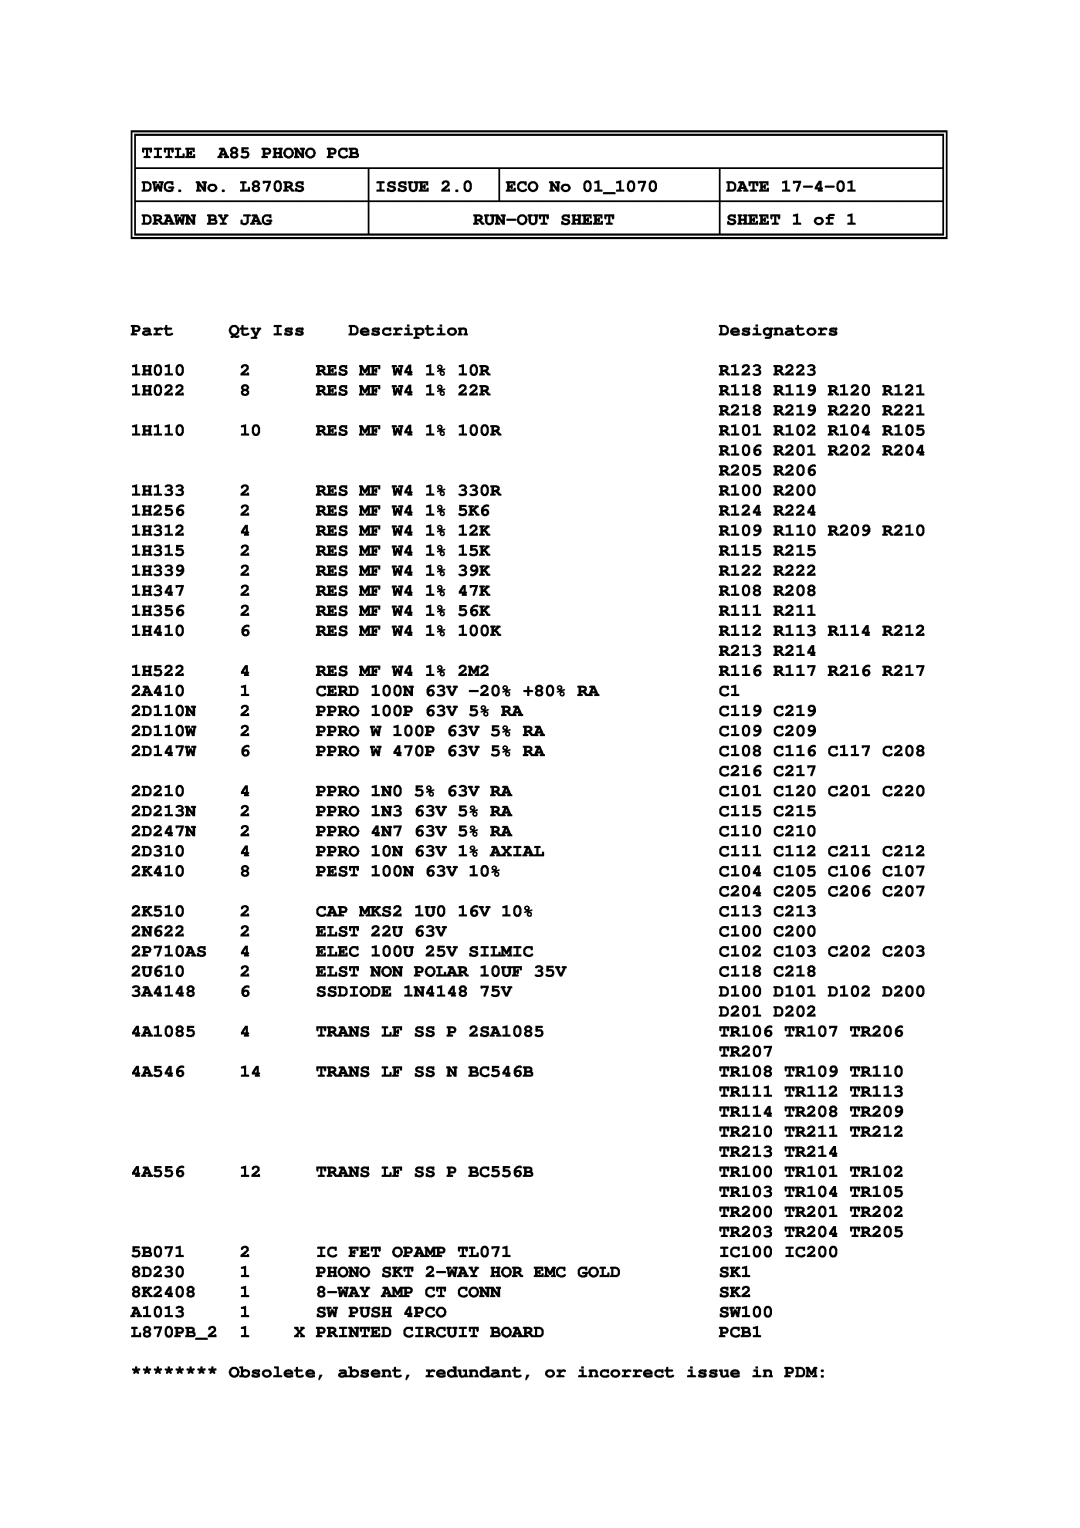 Arcam Title, A85 PHONO PCB, DWG. No. L870RS, Issue, ECO No, Date, Drawn, By Jag, Run-Outsheet, SHEET 1 of, Part, 1H010 